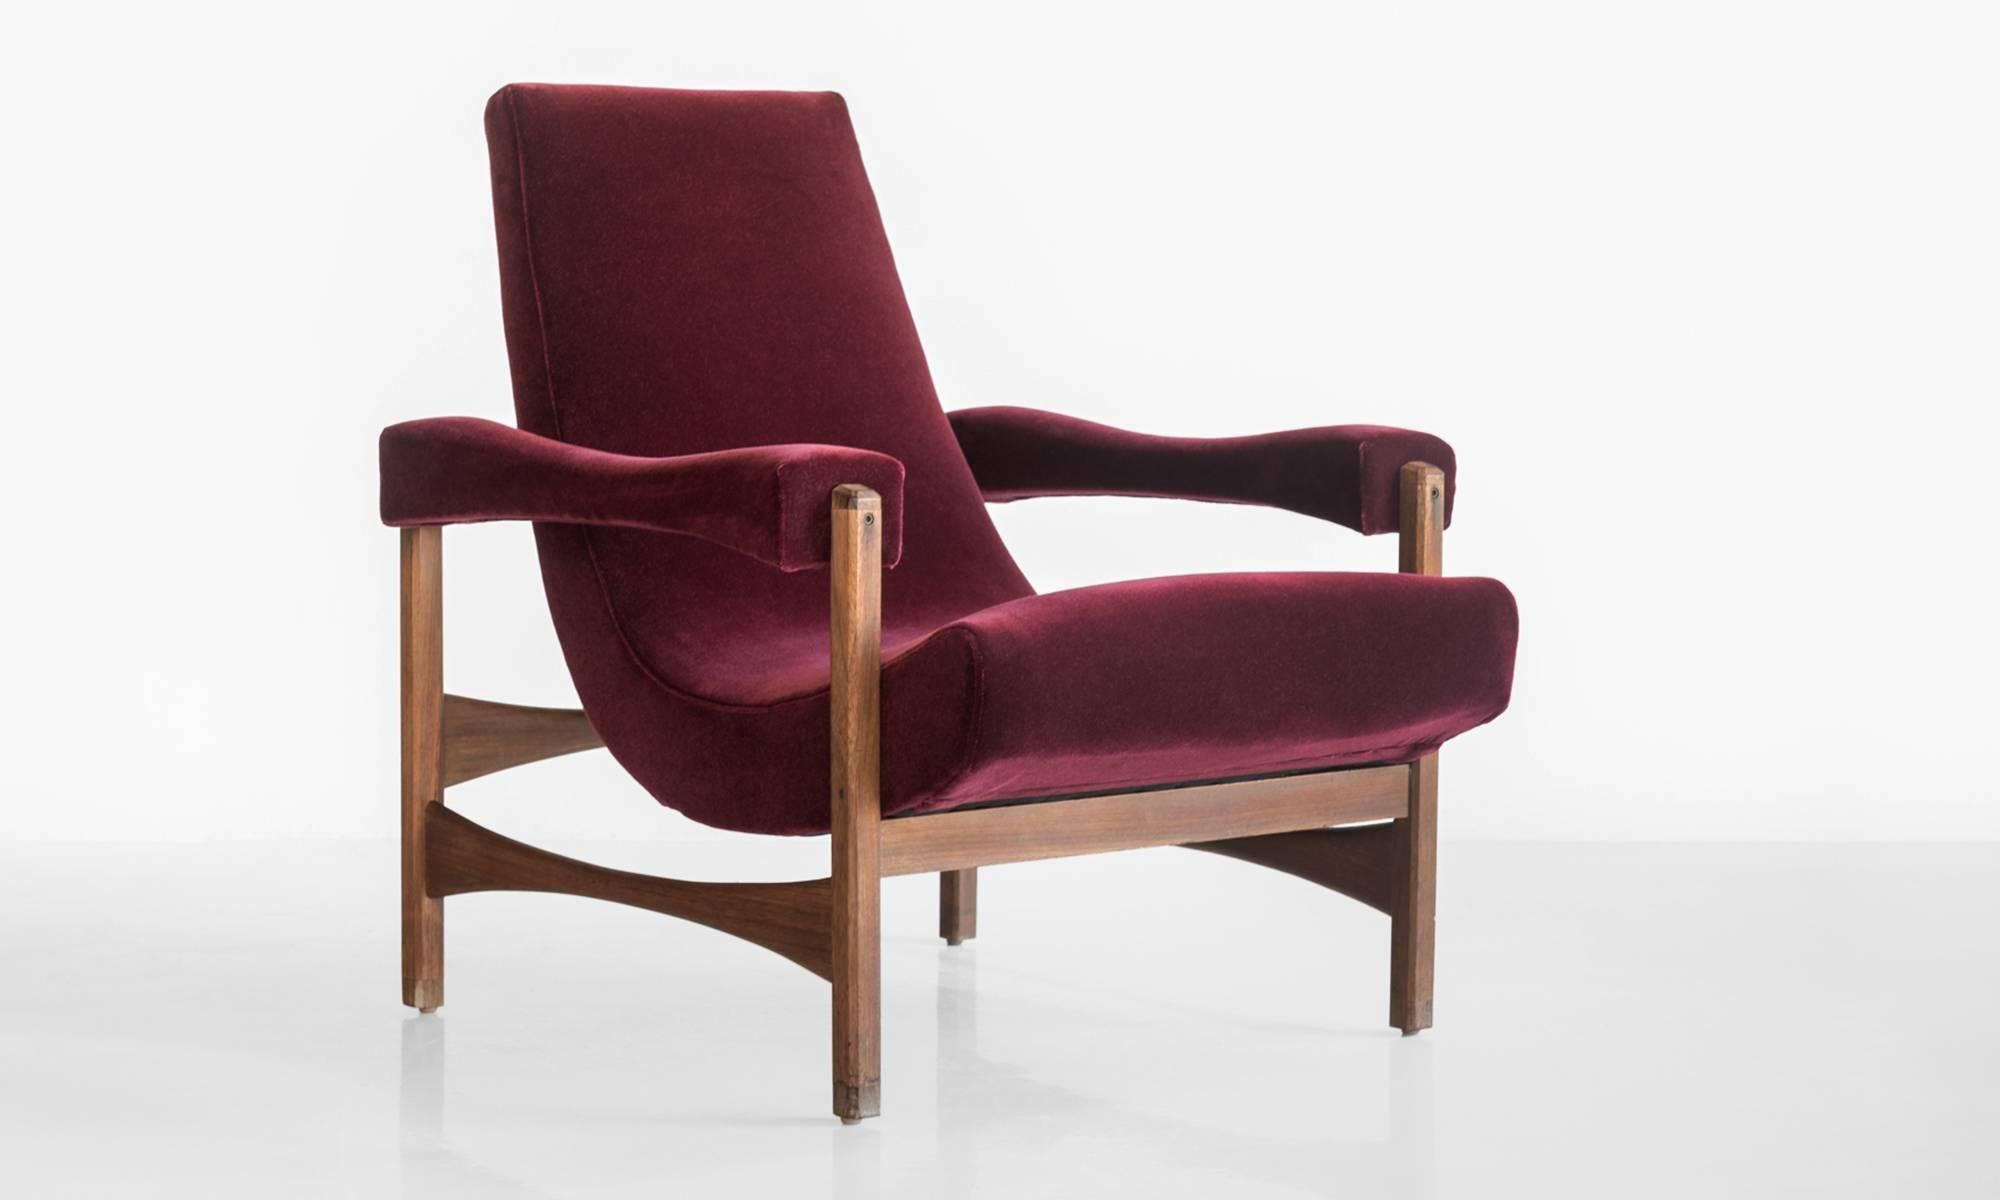 Italian sling arm lounge chair, made in Italy, circa 1960.

Newly upholstered in Burgundy Alpaca Velvet by Maharam.